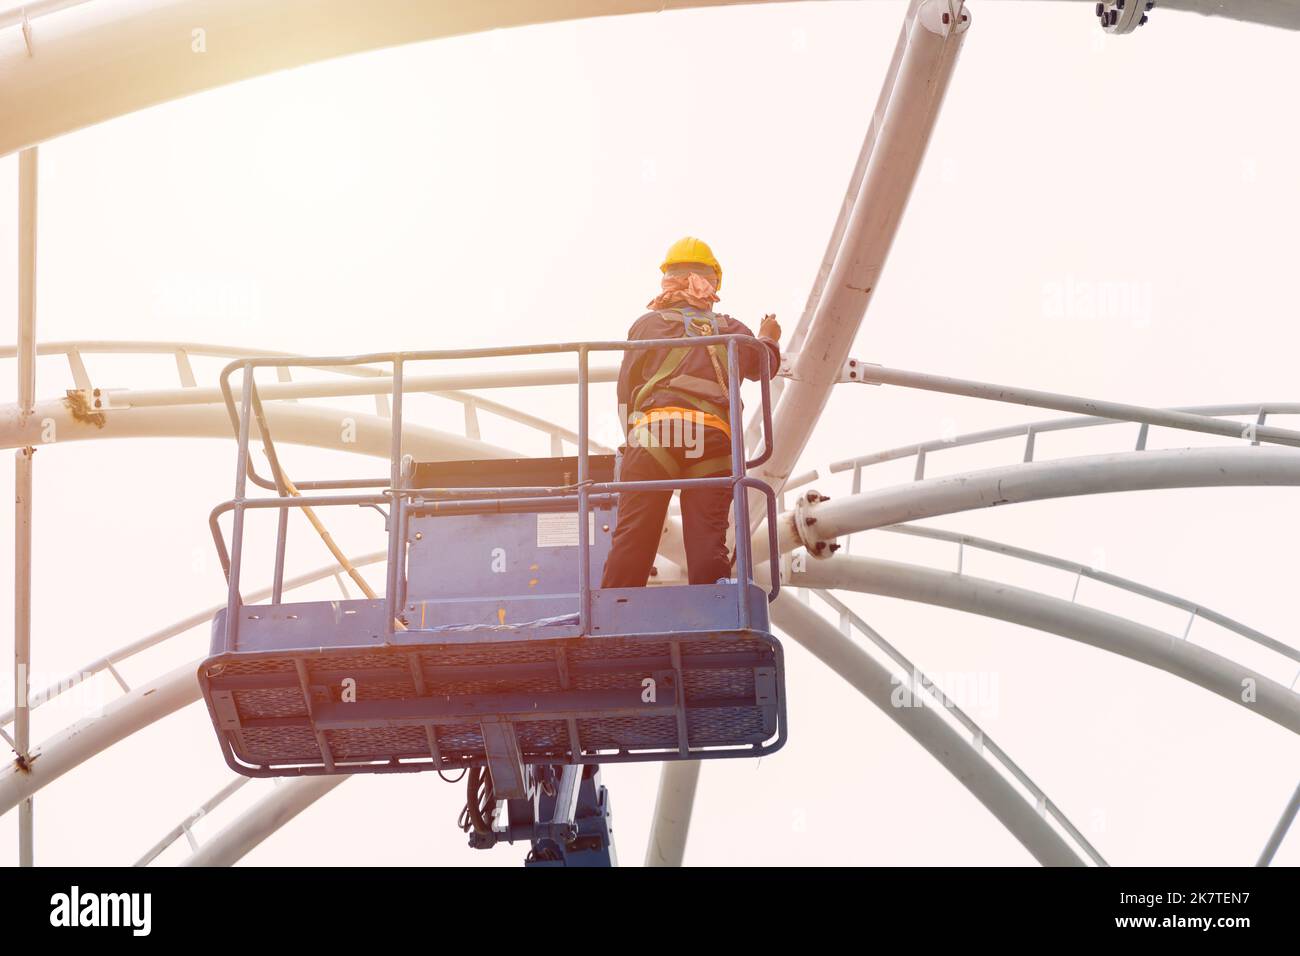 construction worker work at high construction roof on crane platform lift with safety equipment Stock Photo